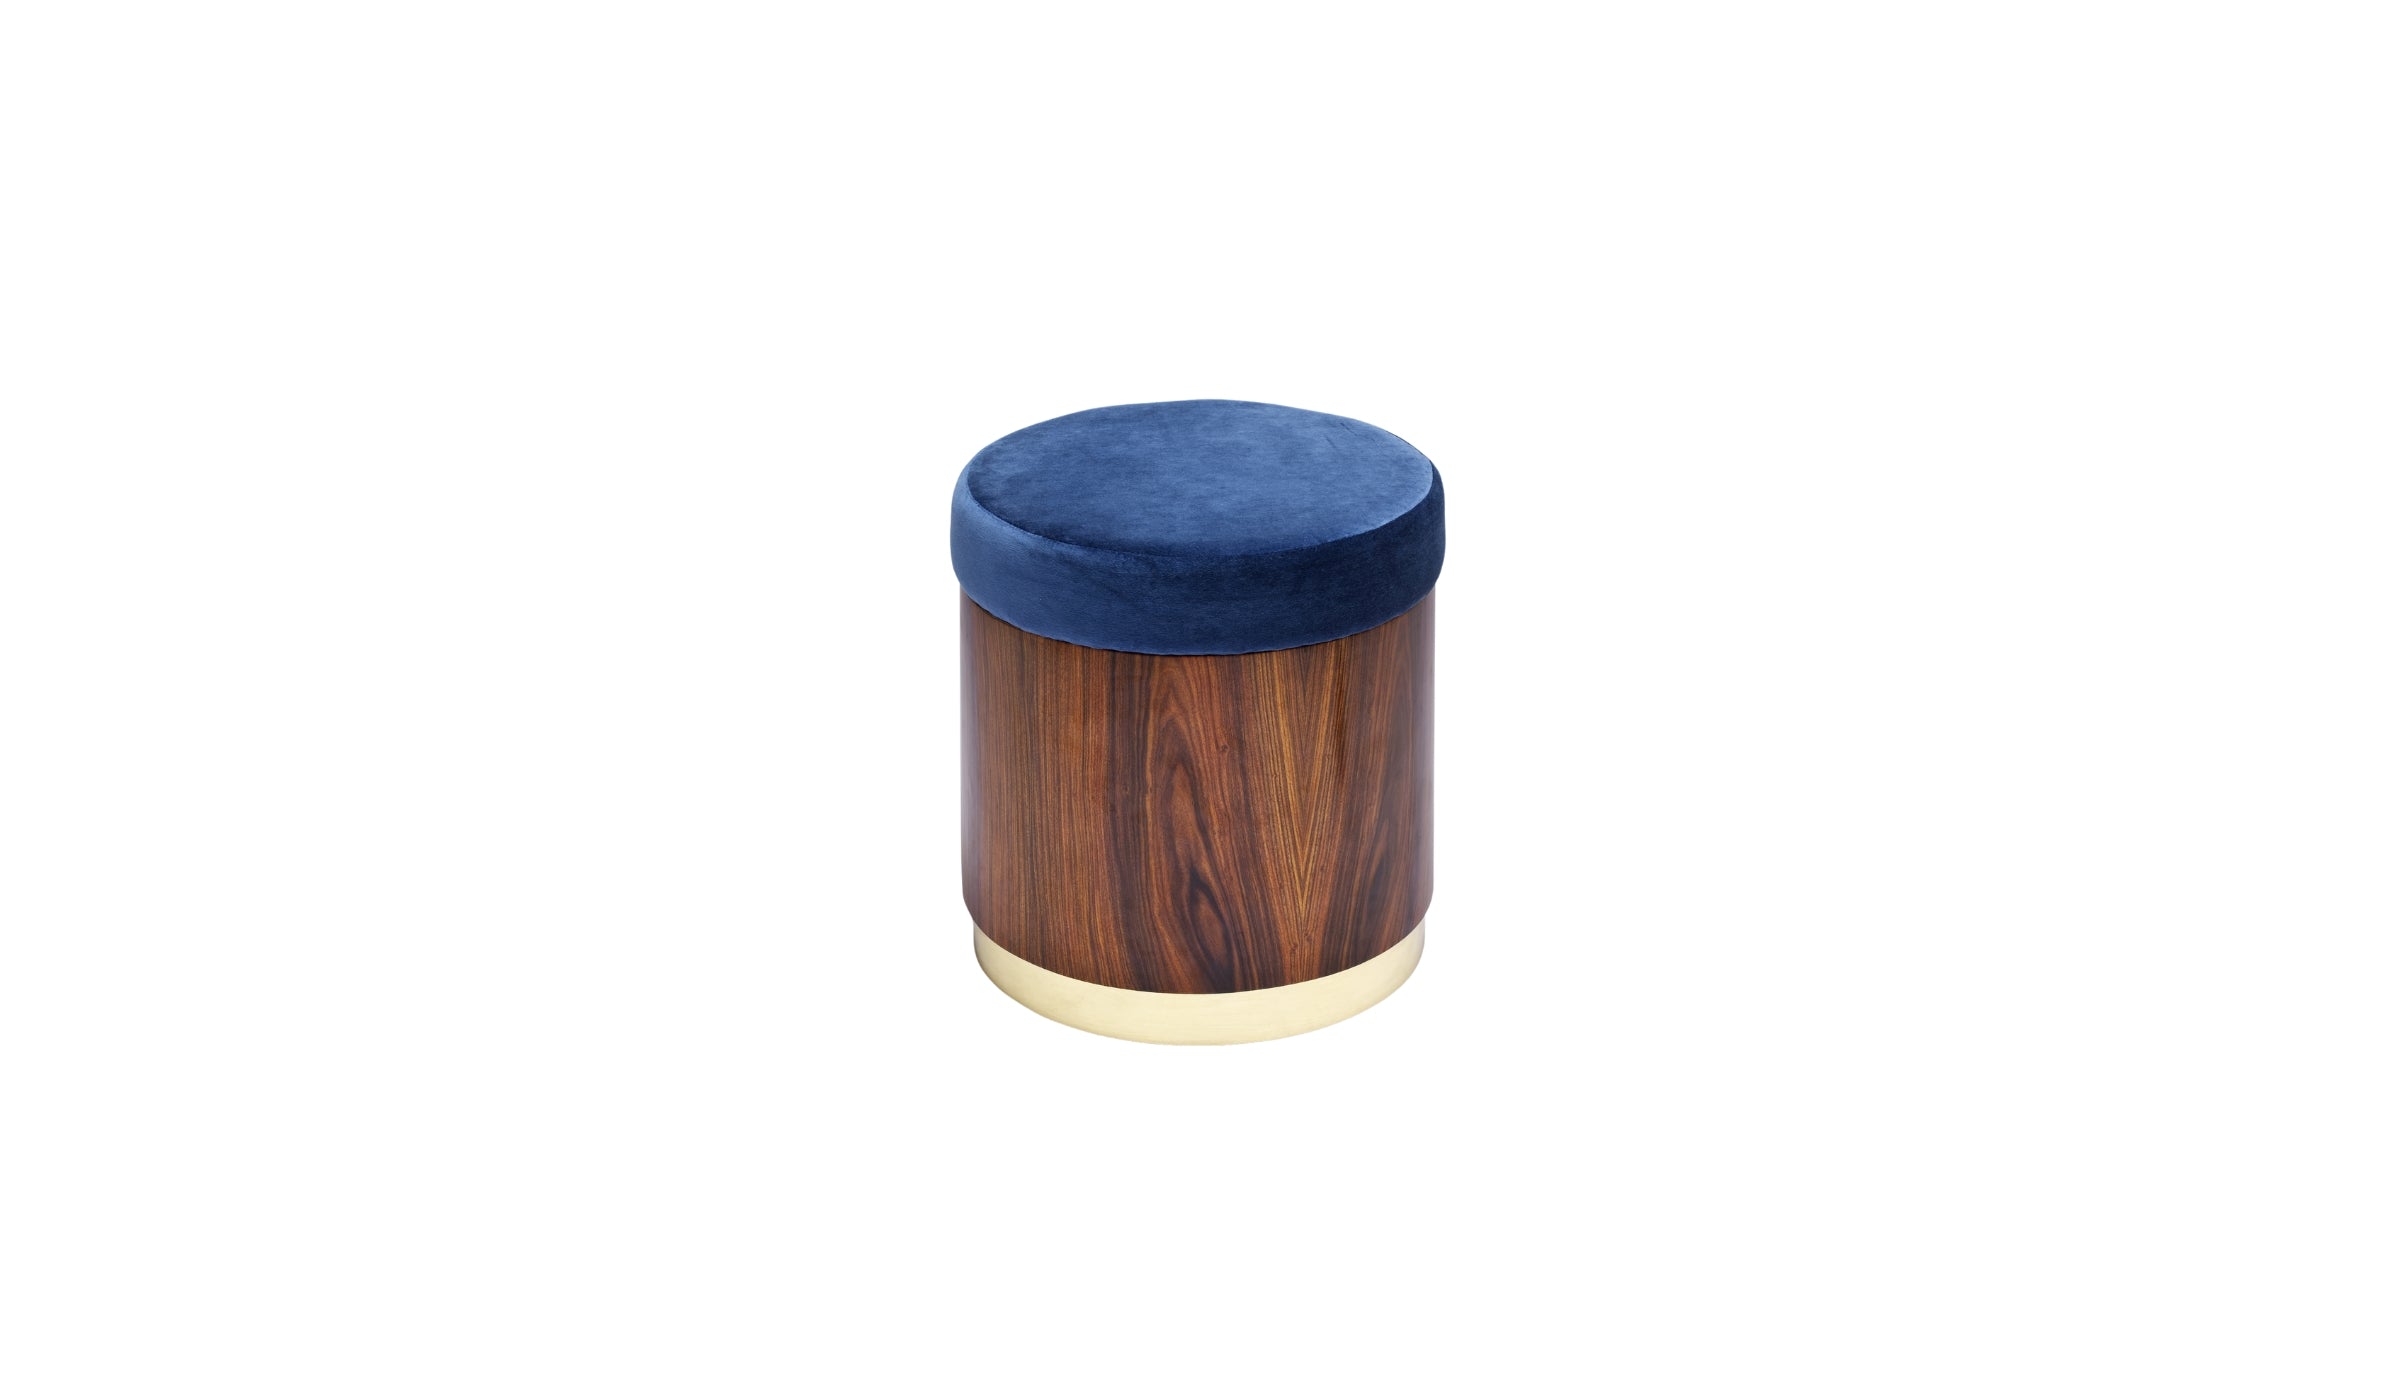 Lune A - Pouf in blue velvet, ironwood and polished brass